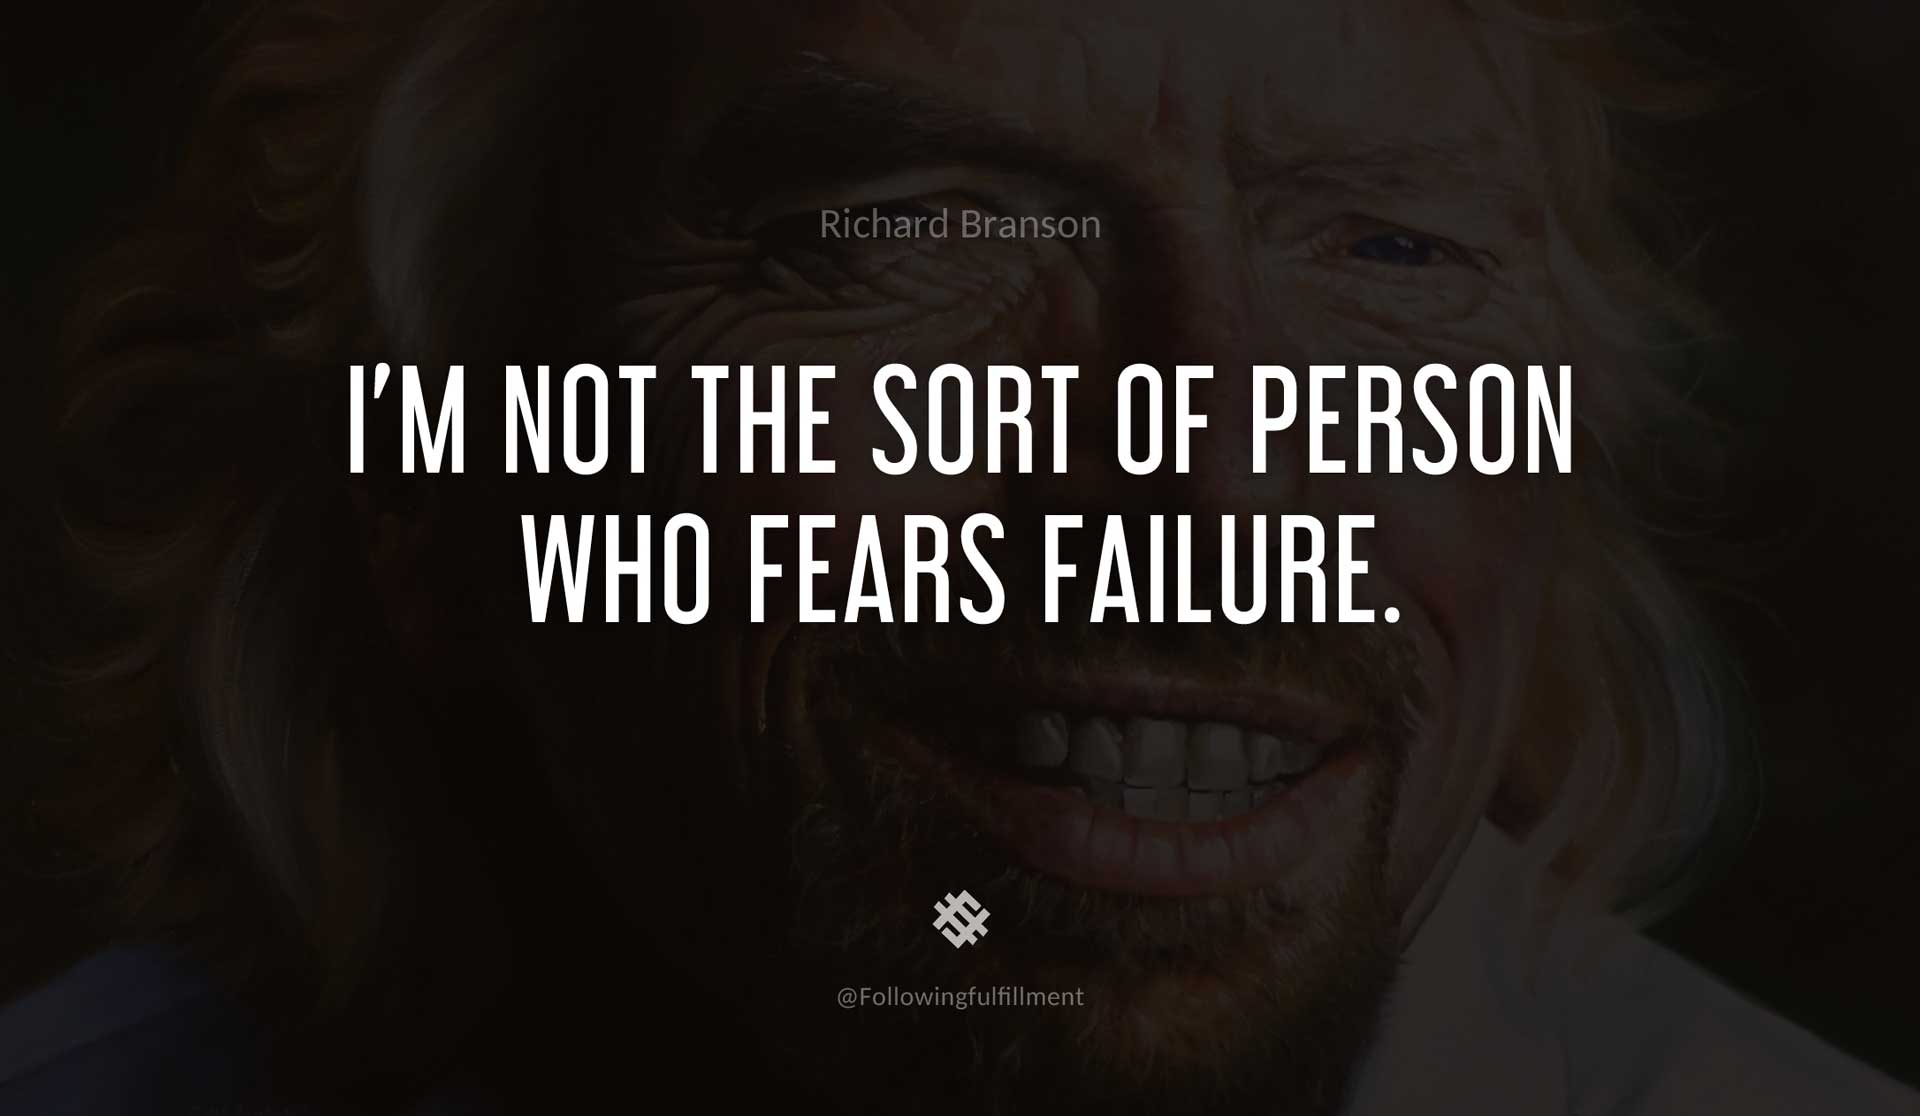 I'm-not-the-sort-of-person-who-fears-failure.-RICHARD-BRANSON-Quote.jpg